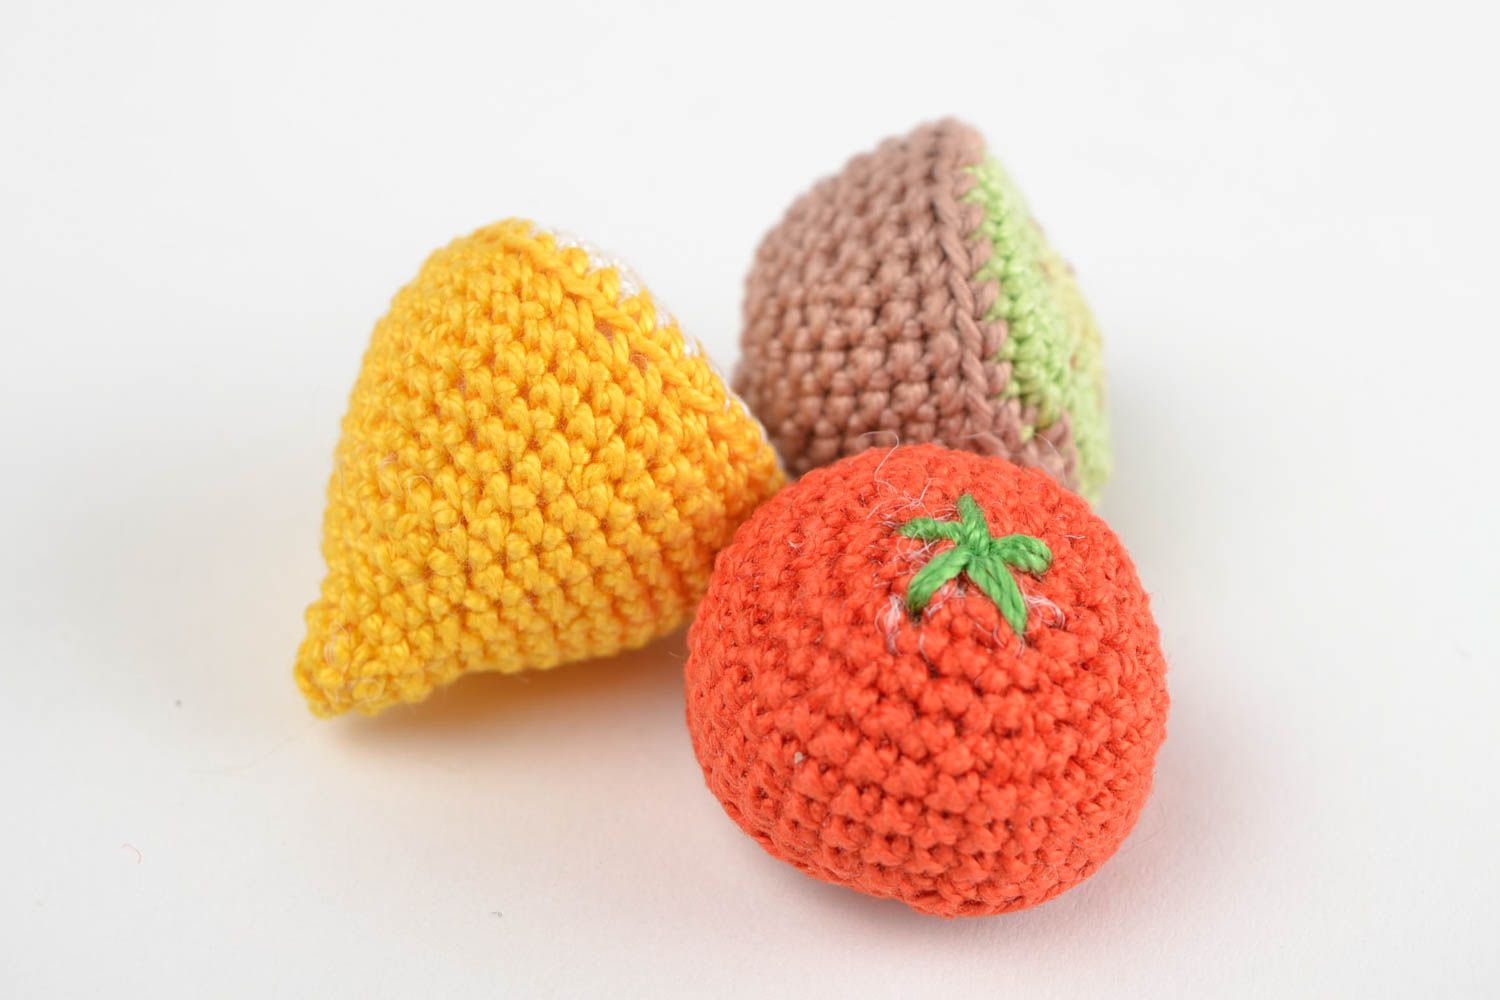 Handmade toy crocheted toy unusual toys for baby toy fruit gift ideas photo 4